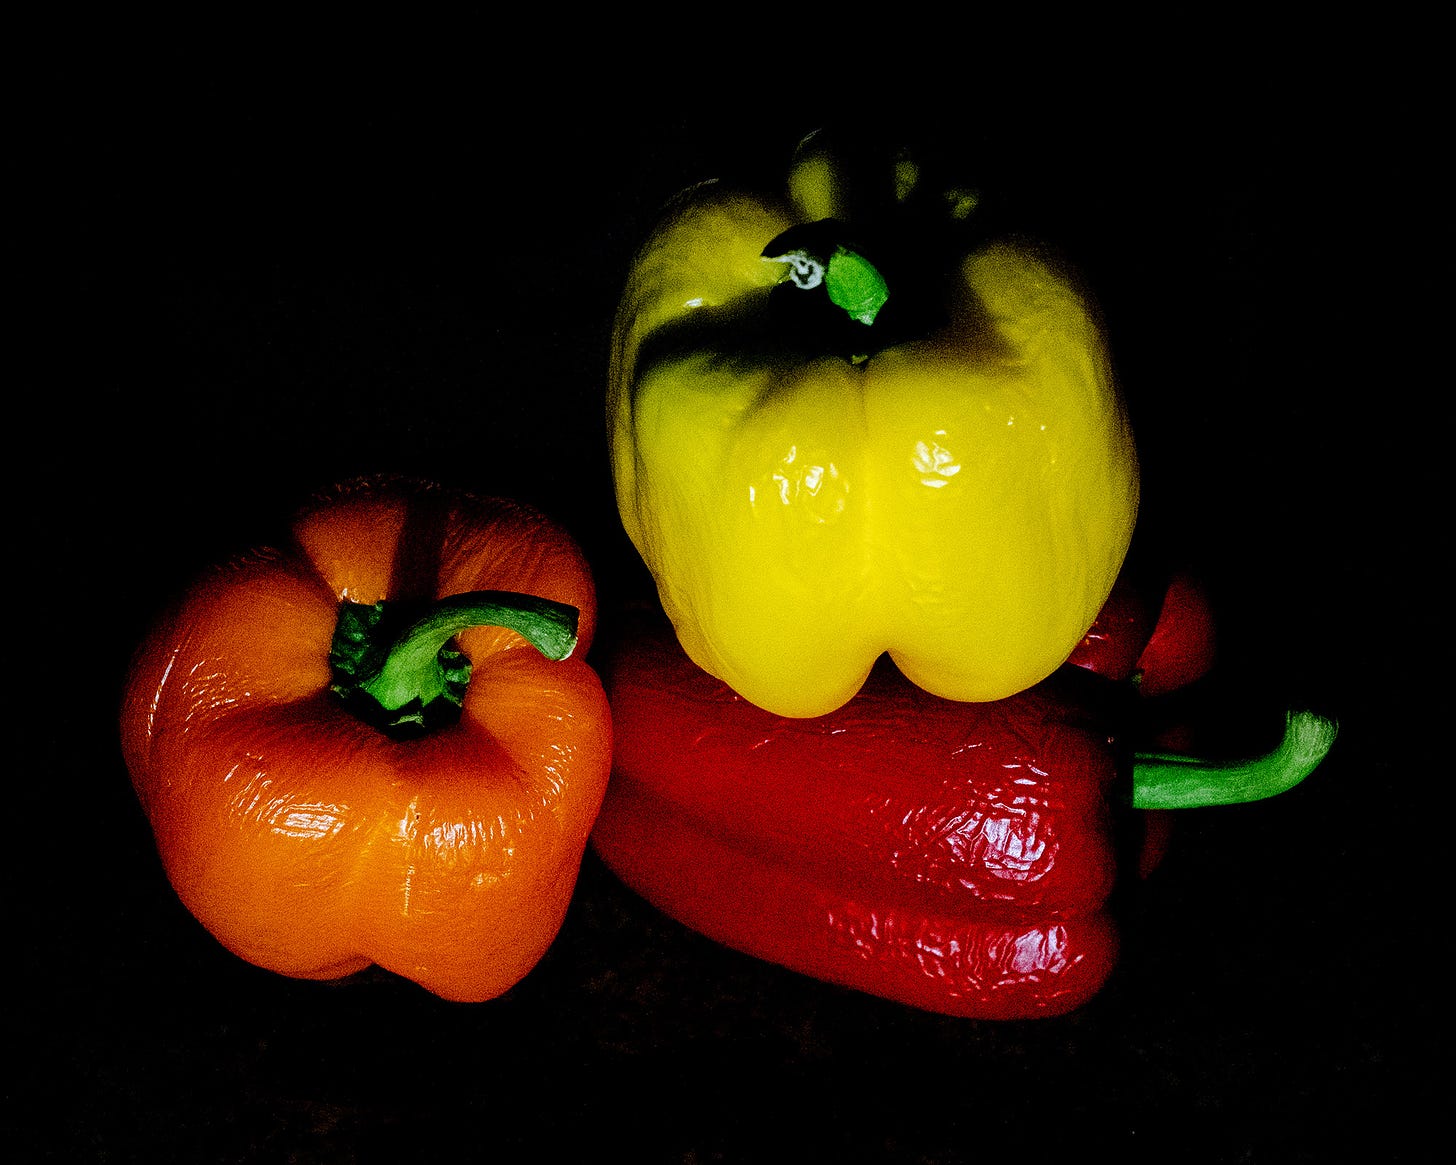 Three peppers - 1 red, 1 orange, and 1 yellow - arranged on a kitchen counter engulfed in shadows.